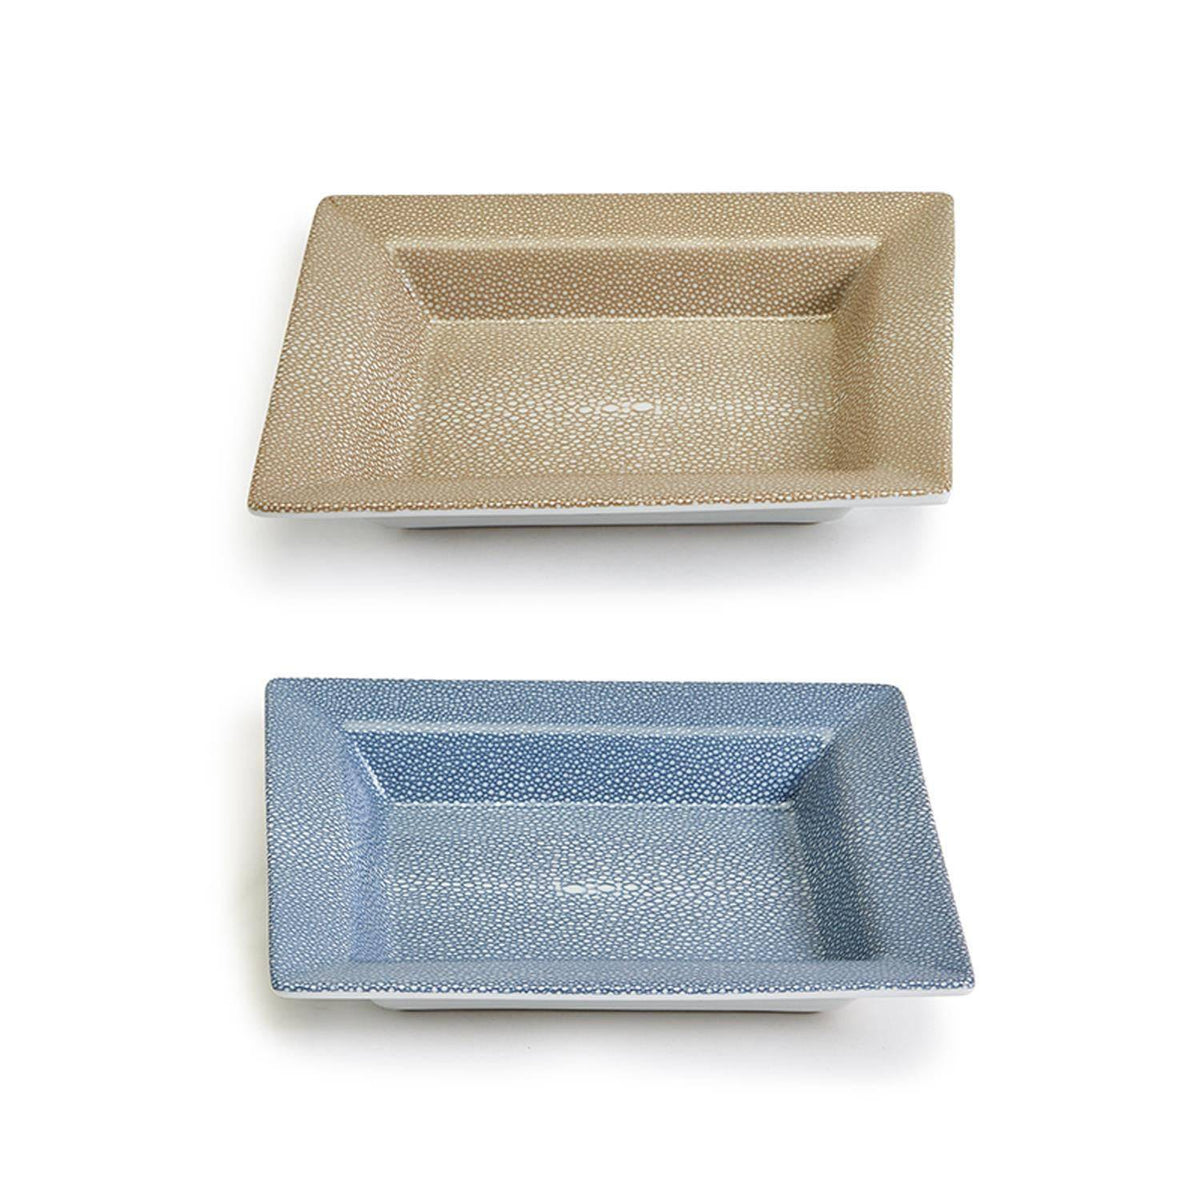 Embossed Shagreen Porcelain Decorative Tray 2 Colors: Camel, French Blue - The Preppy Bunny